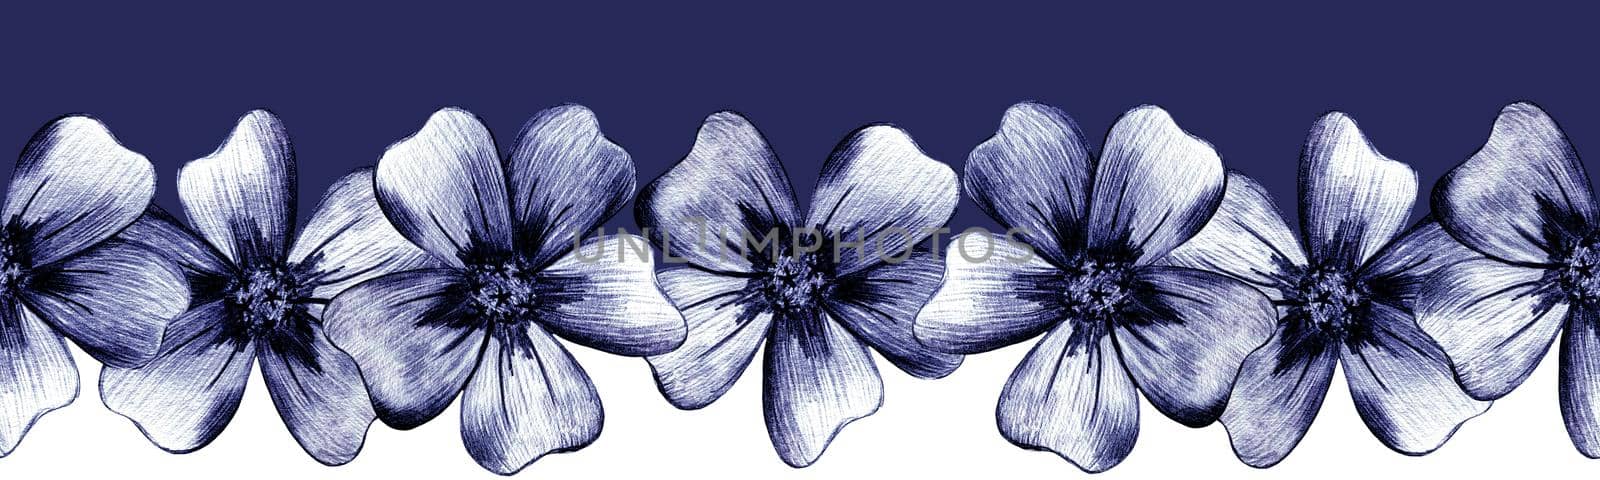 Flower Seamless Border. Floral Border with Blue Marigolds Drawn by Color Pencils. Seamless Floral Background in Hand Drawn Style Isolated on White.